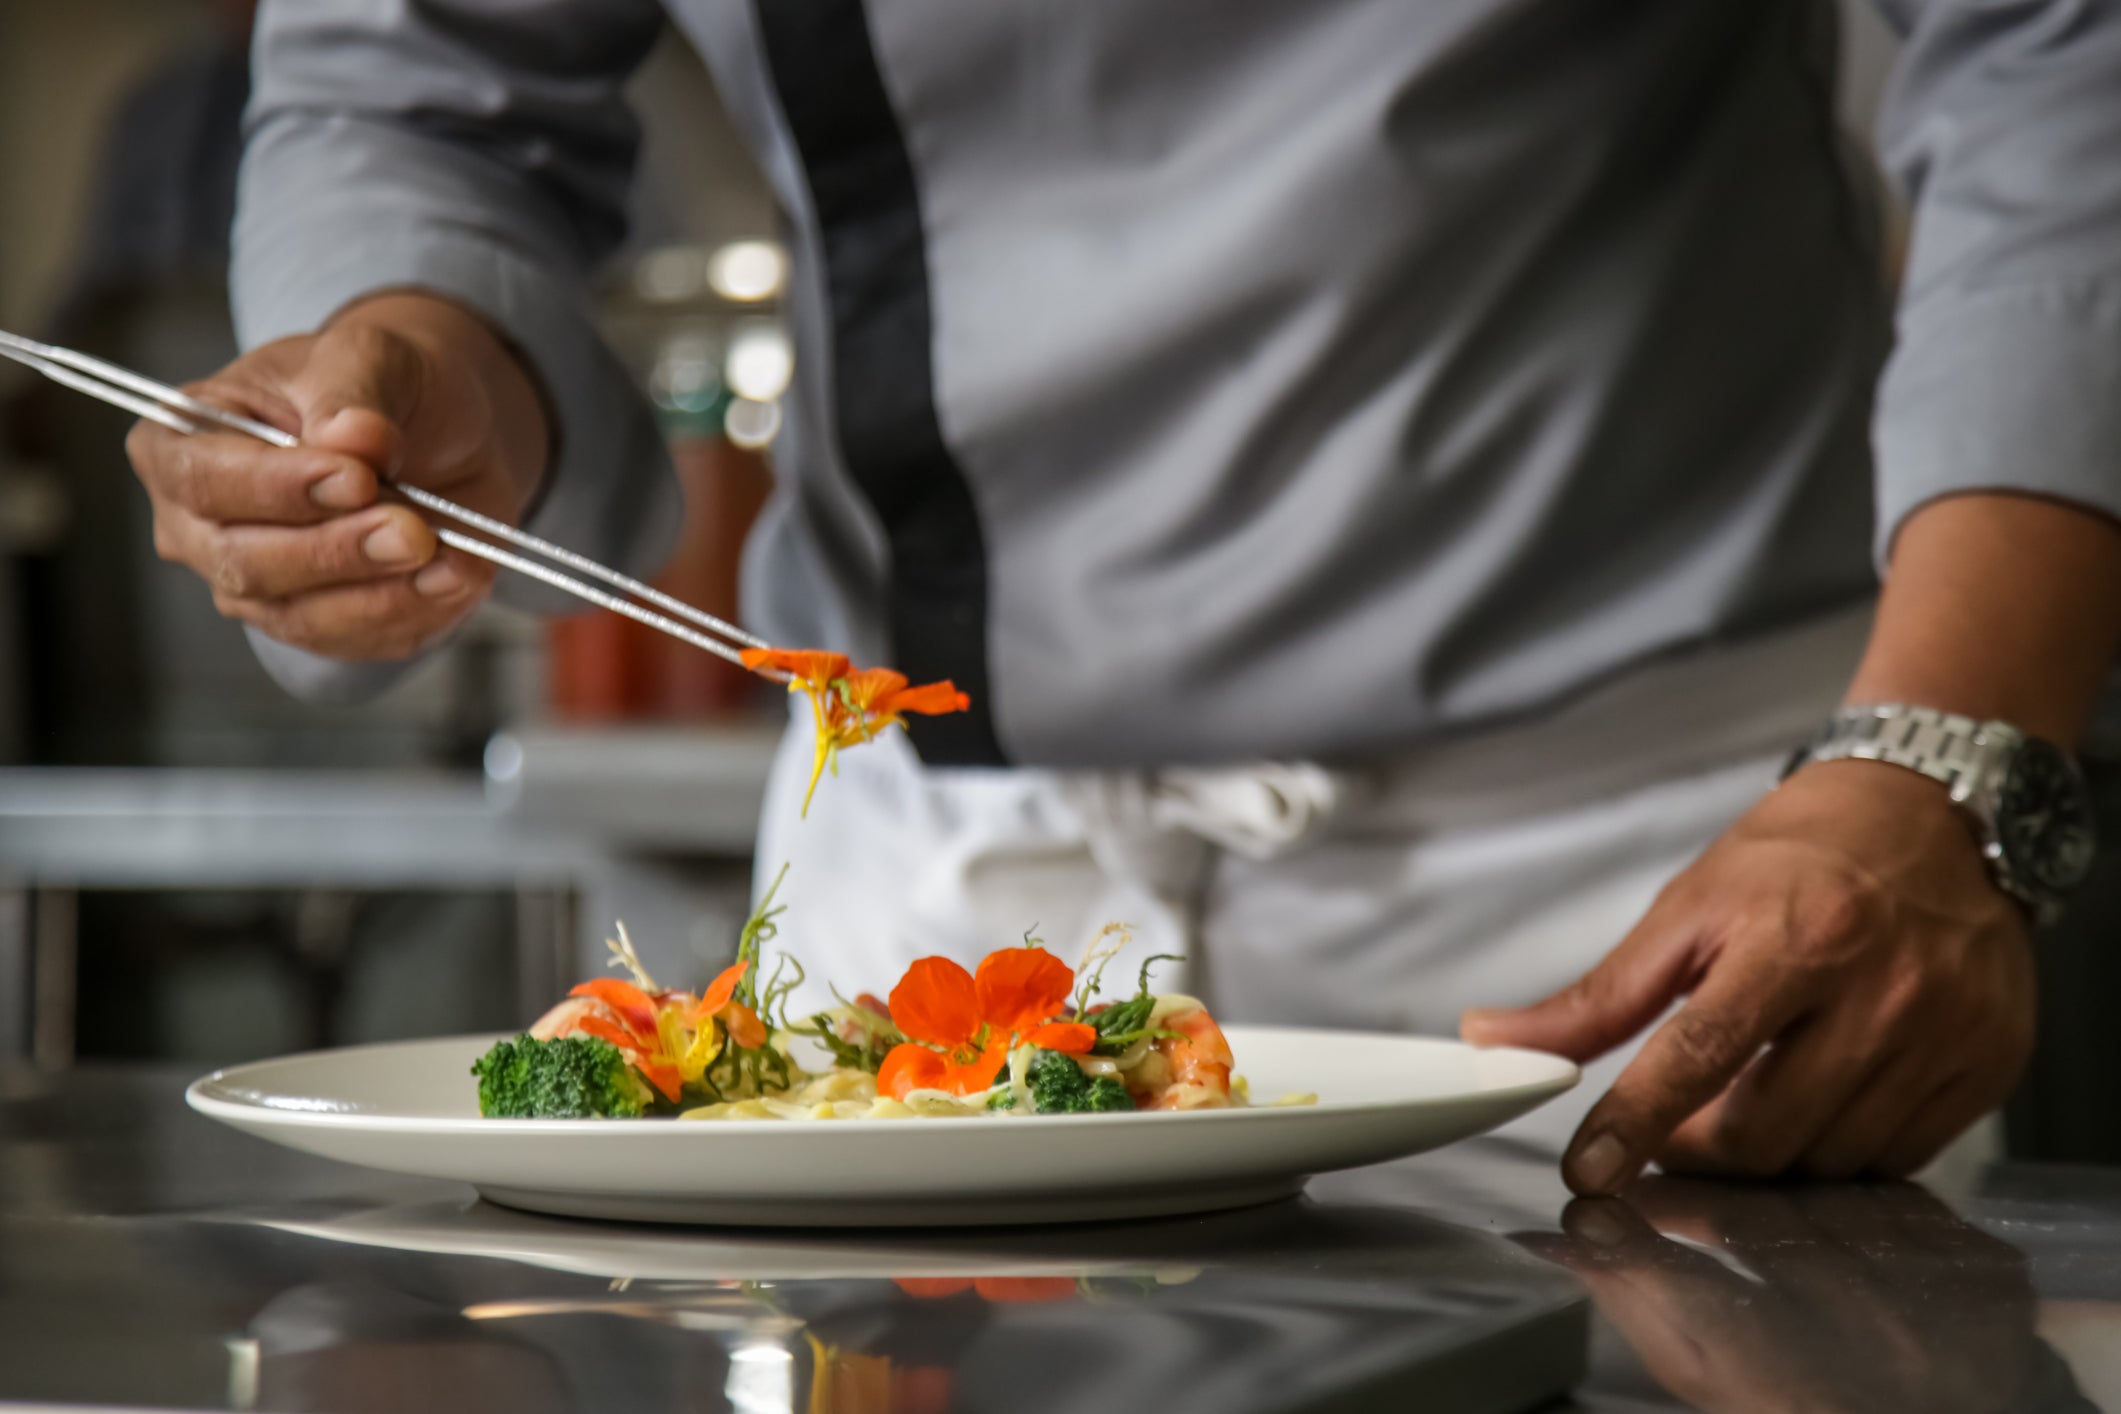 Chef arranging decoration on plate